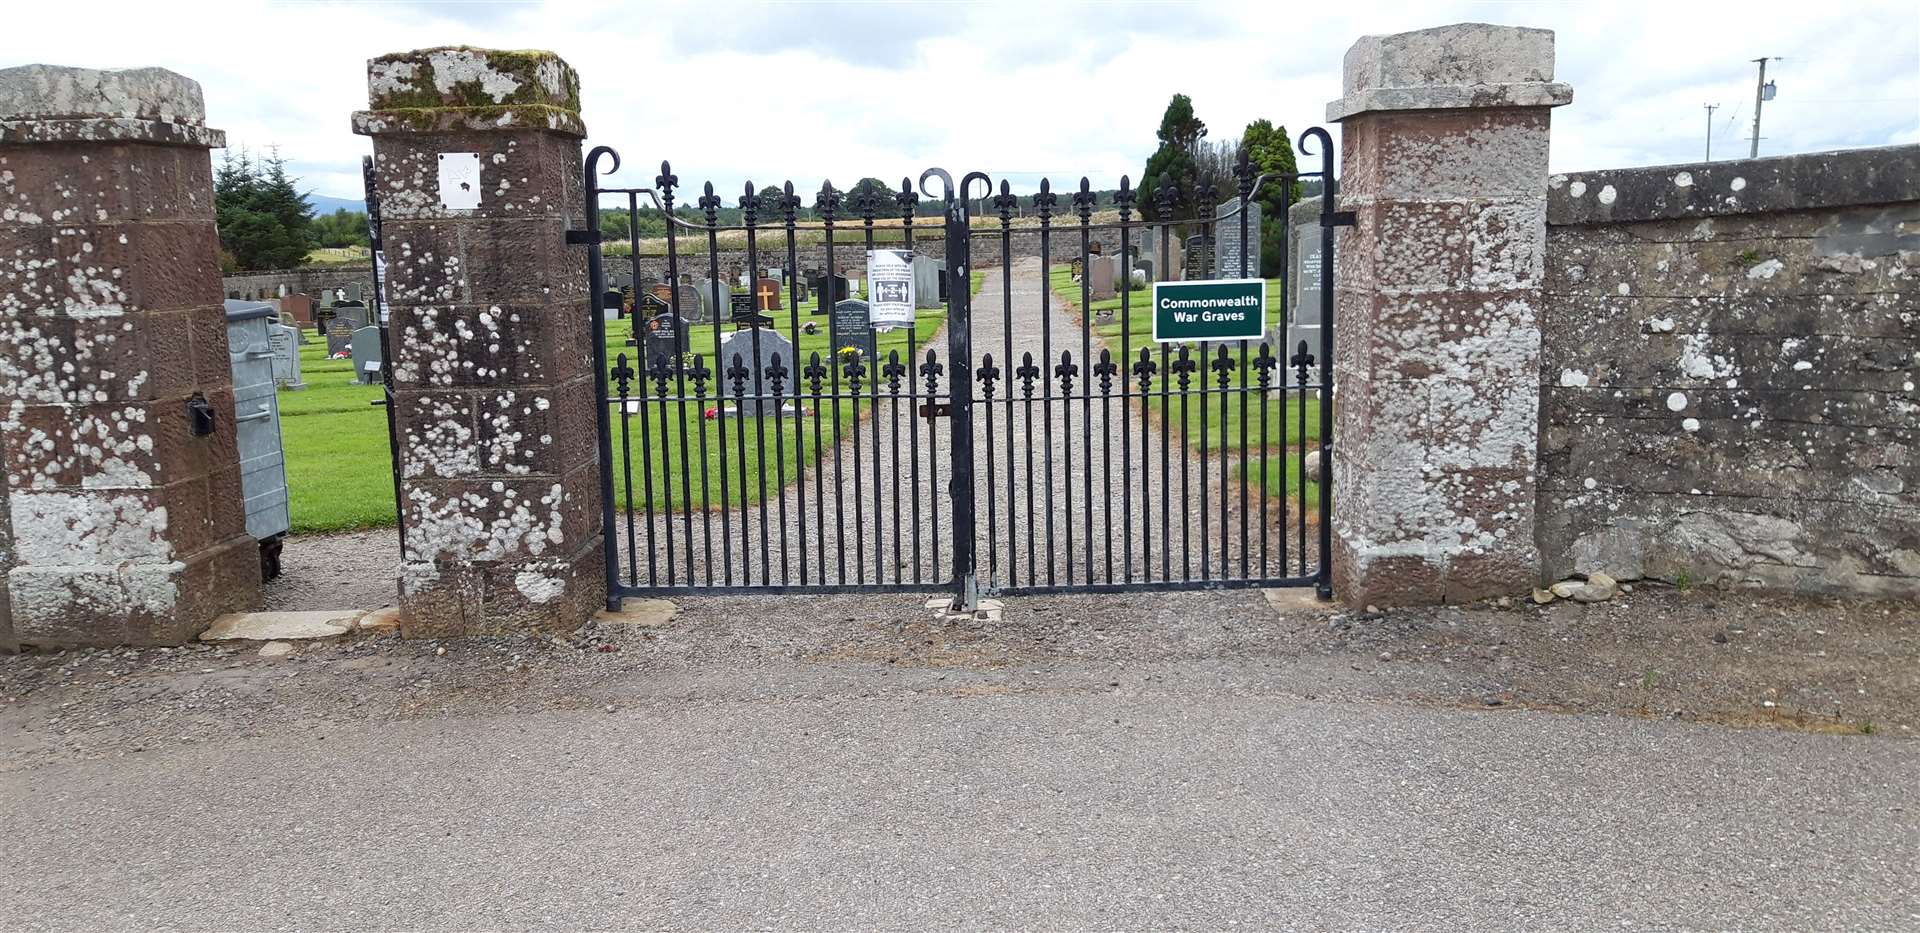 Proncynain Cemetery at Dornoch has 562 lairs of which 510 are full.